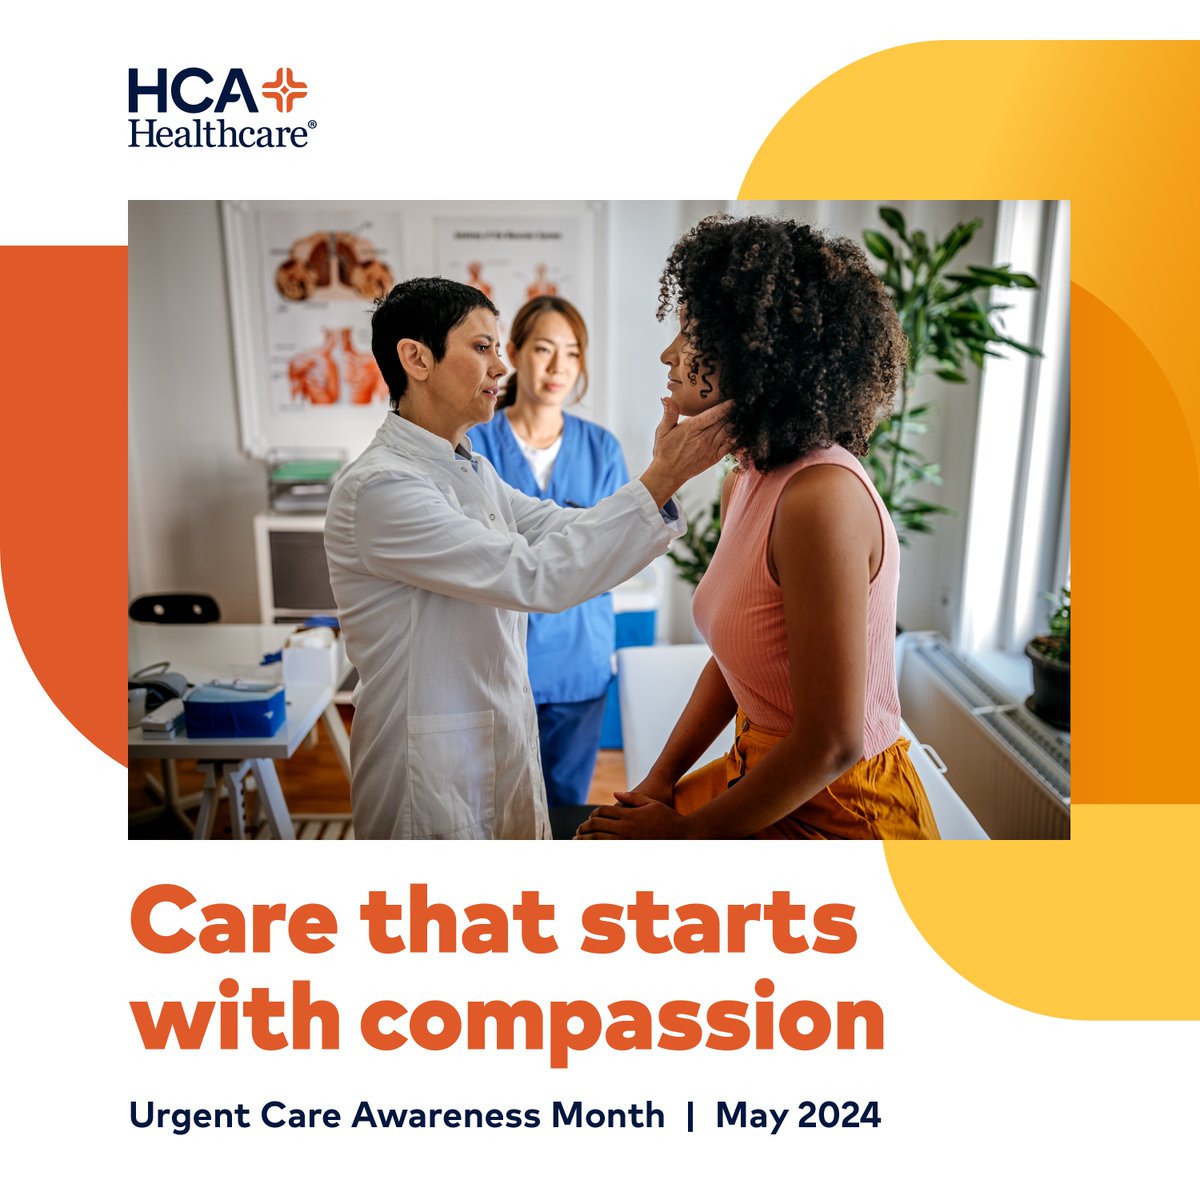 Each May, we honor #UrgentCareAwarenessMonth, which recognizes the vital role our urgent care colleagues play in caring for patients at the more than 330 @CareNow clinics across our larger @HCAHealthcare network. #HealthierTomorrows